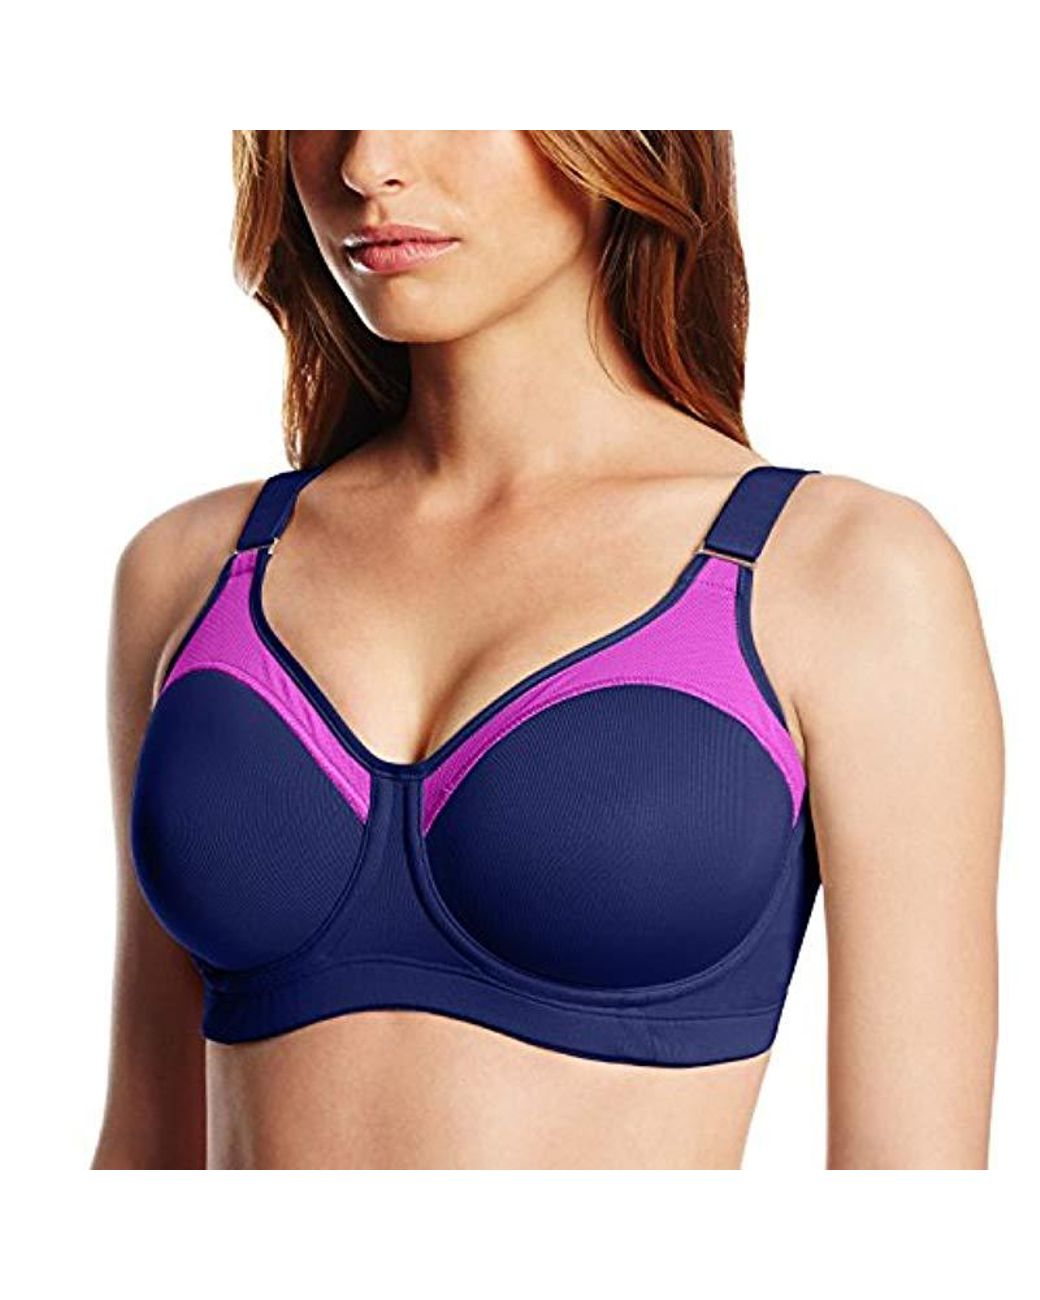 Playtex Play Outgoer Wirefree Full Coverage Bra 4910 in Blue